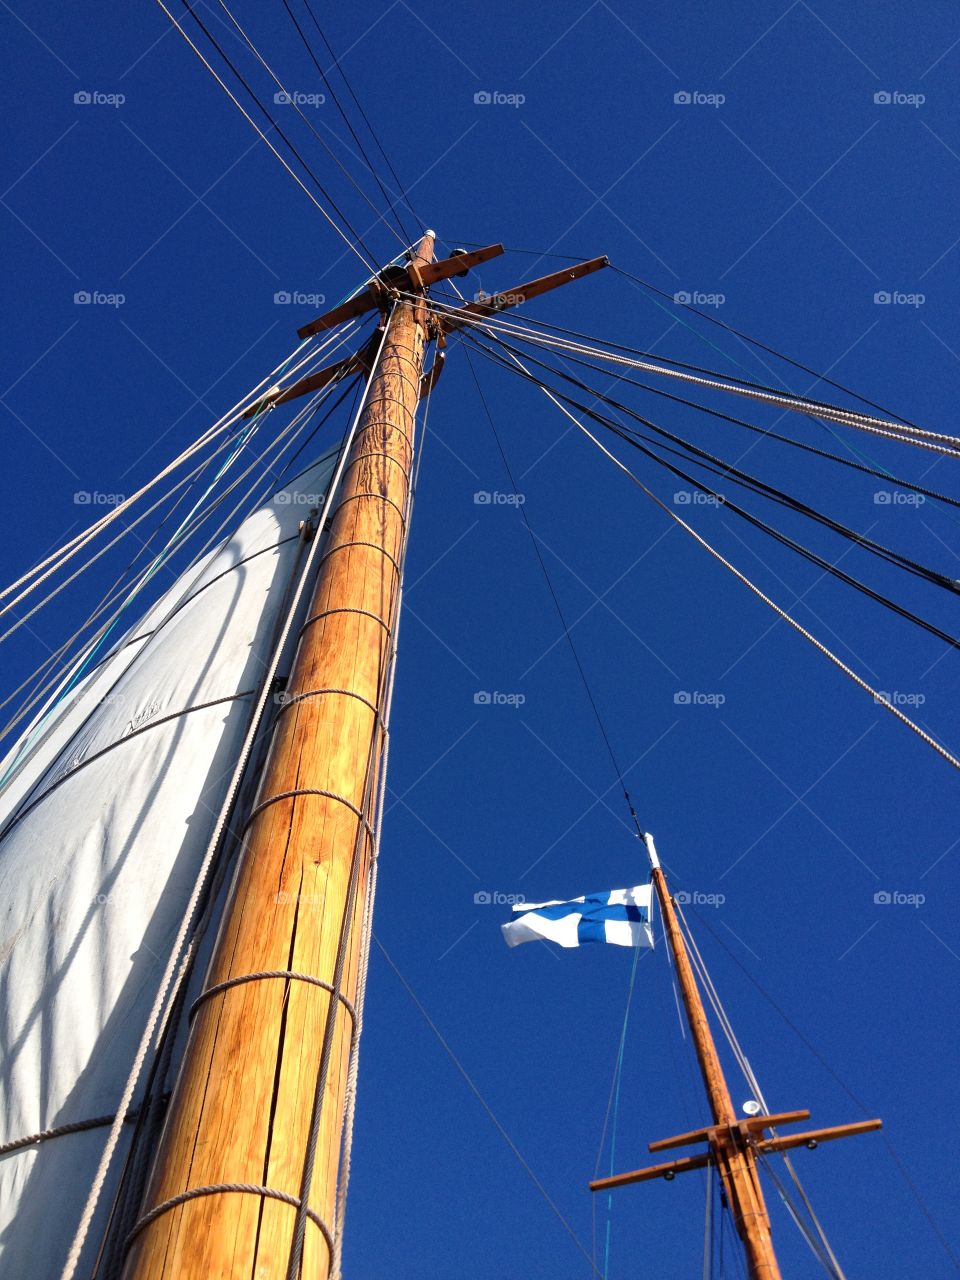 To catch the wind. Ship masts with Finnish flag